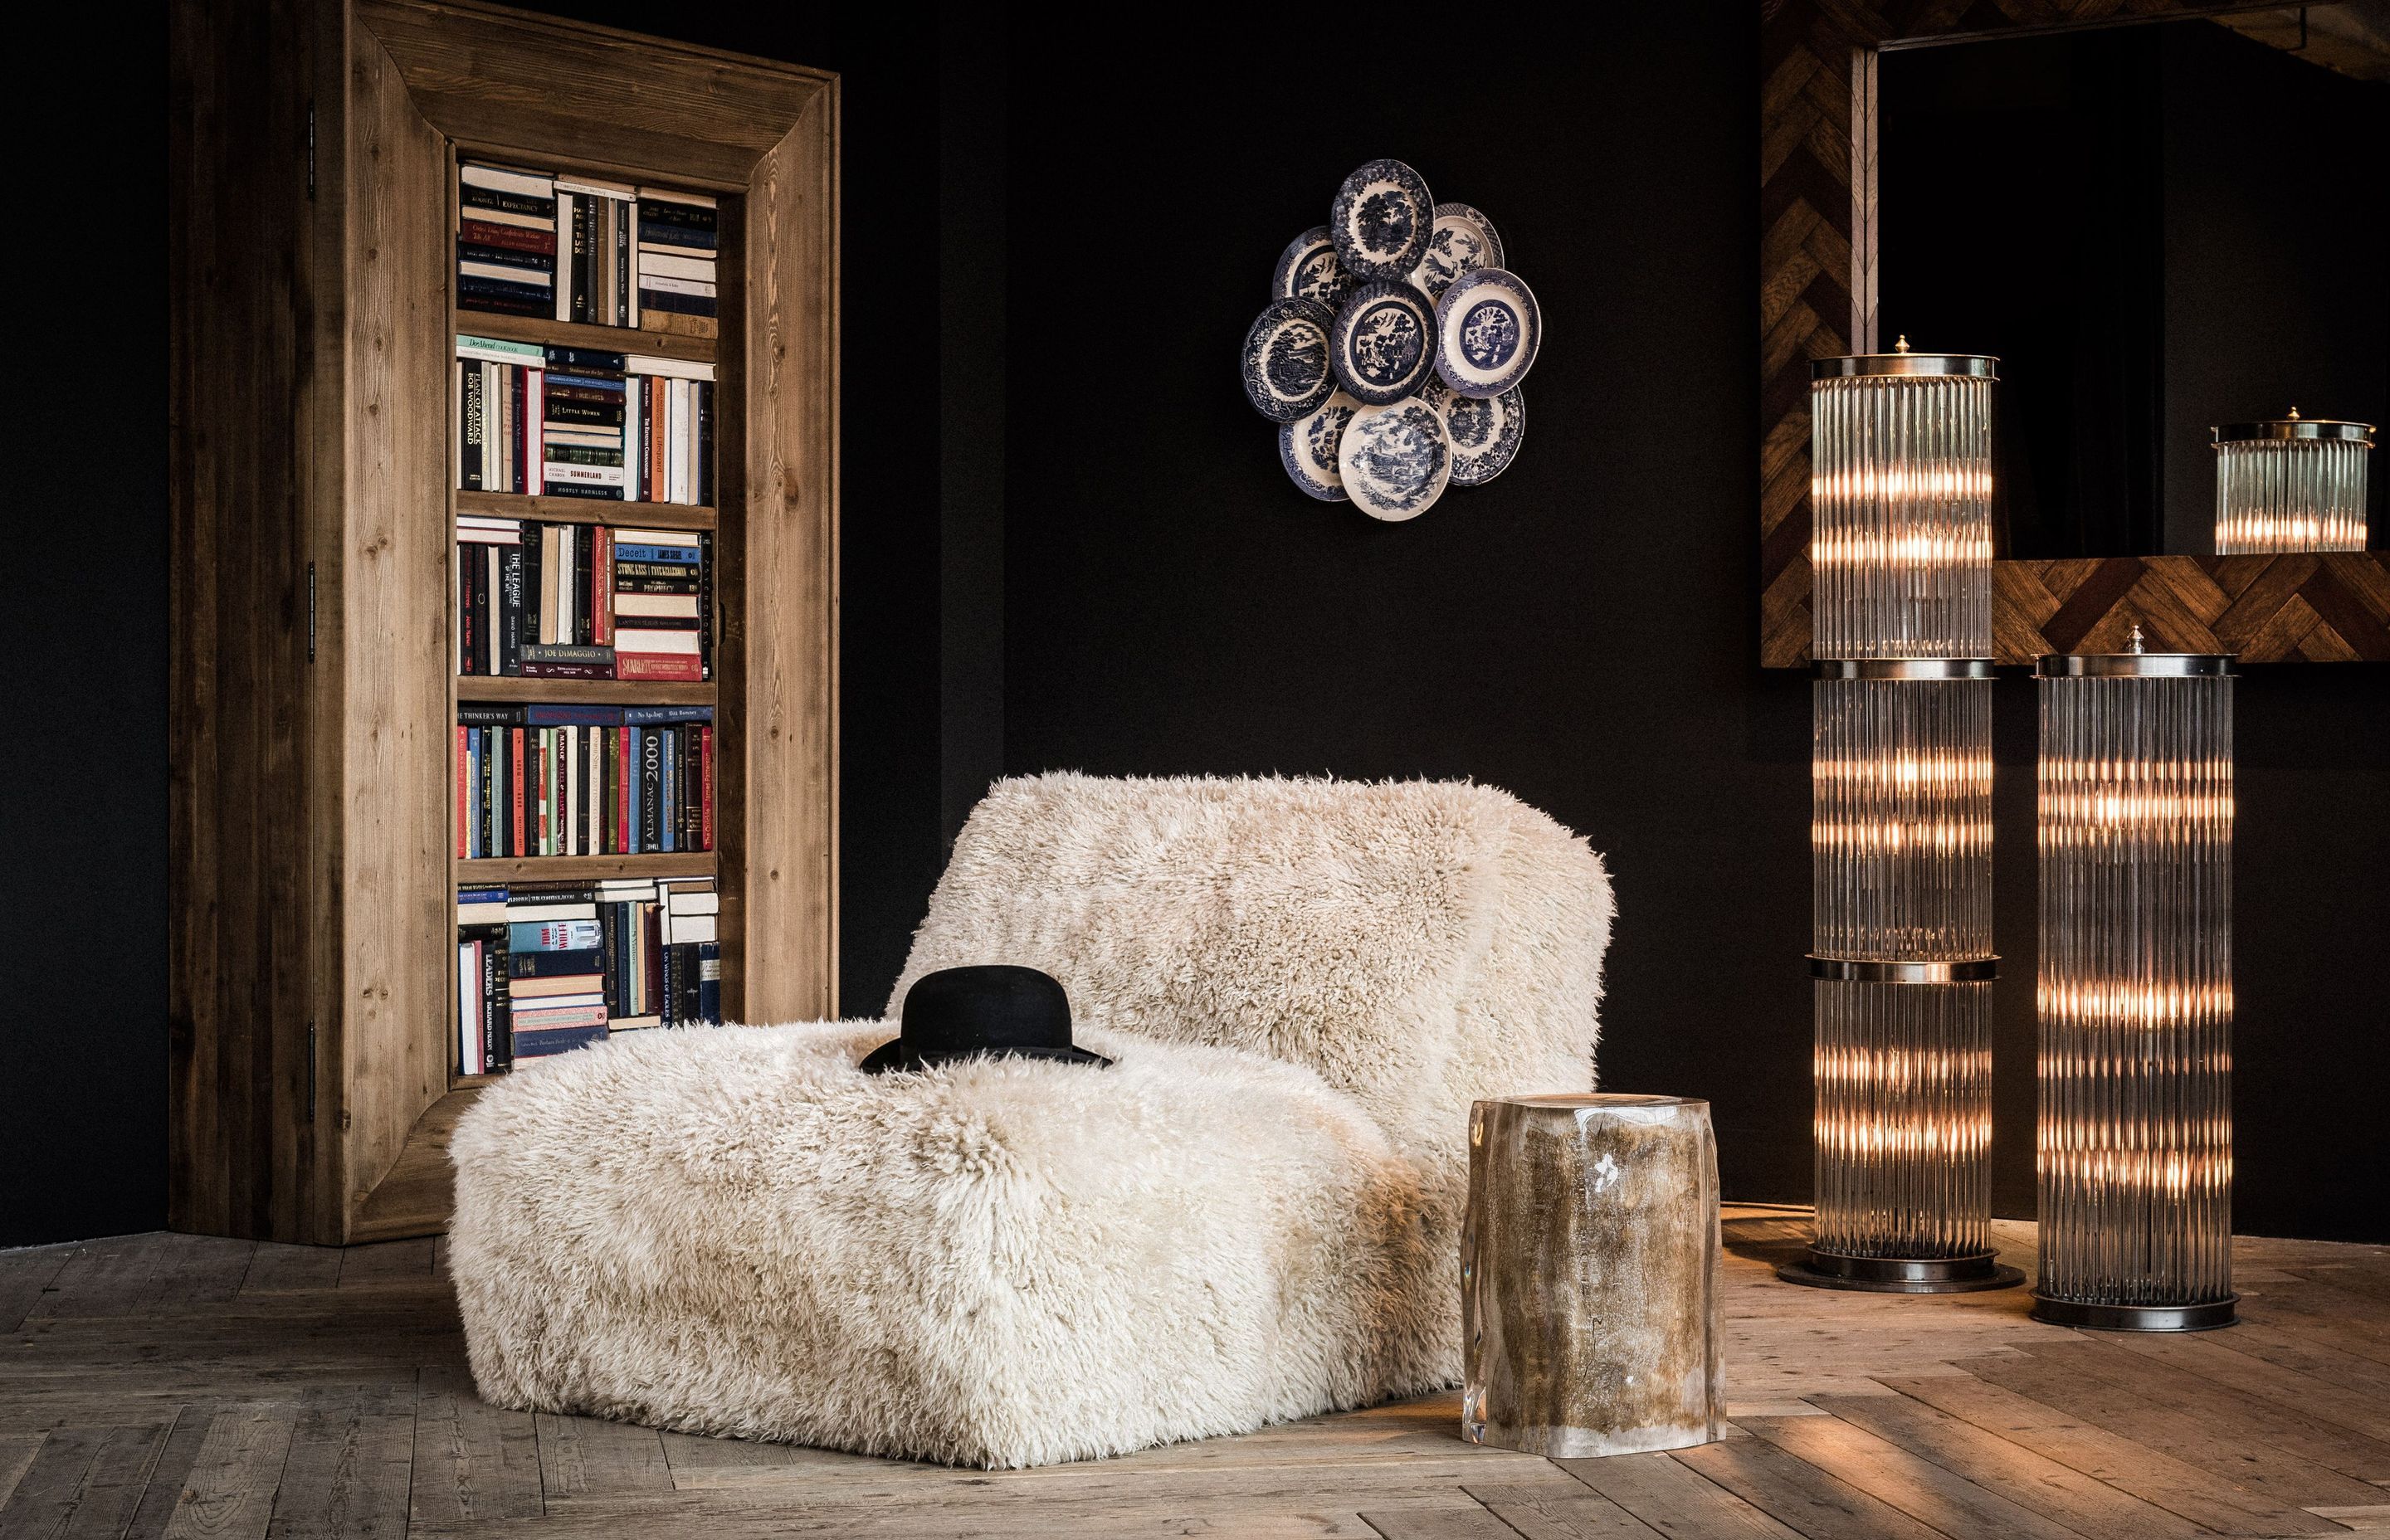 Timothy Oulton: The furniture at the intersection of humble luxury and unique eclecticism